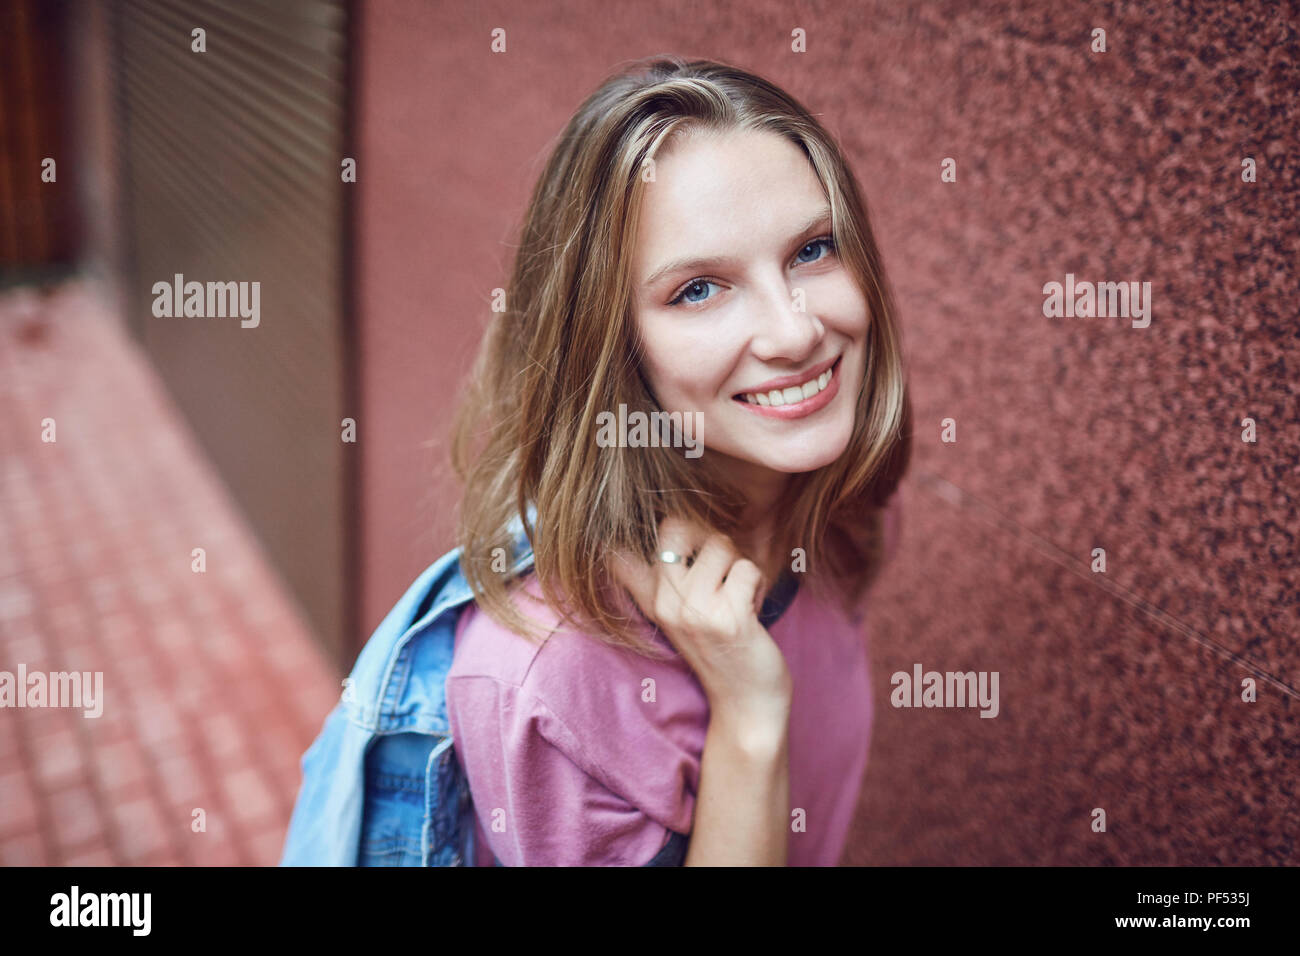 A blonde girl is smiling on a city street Stock Photo